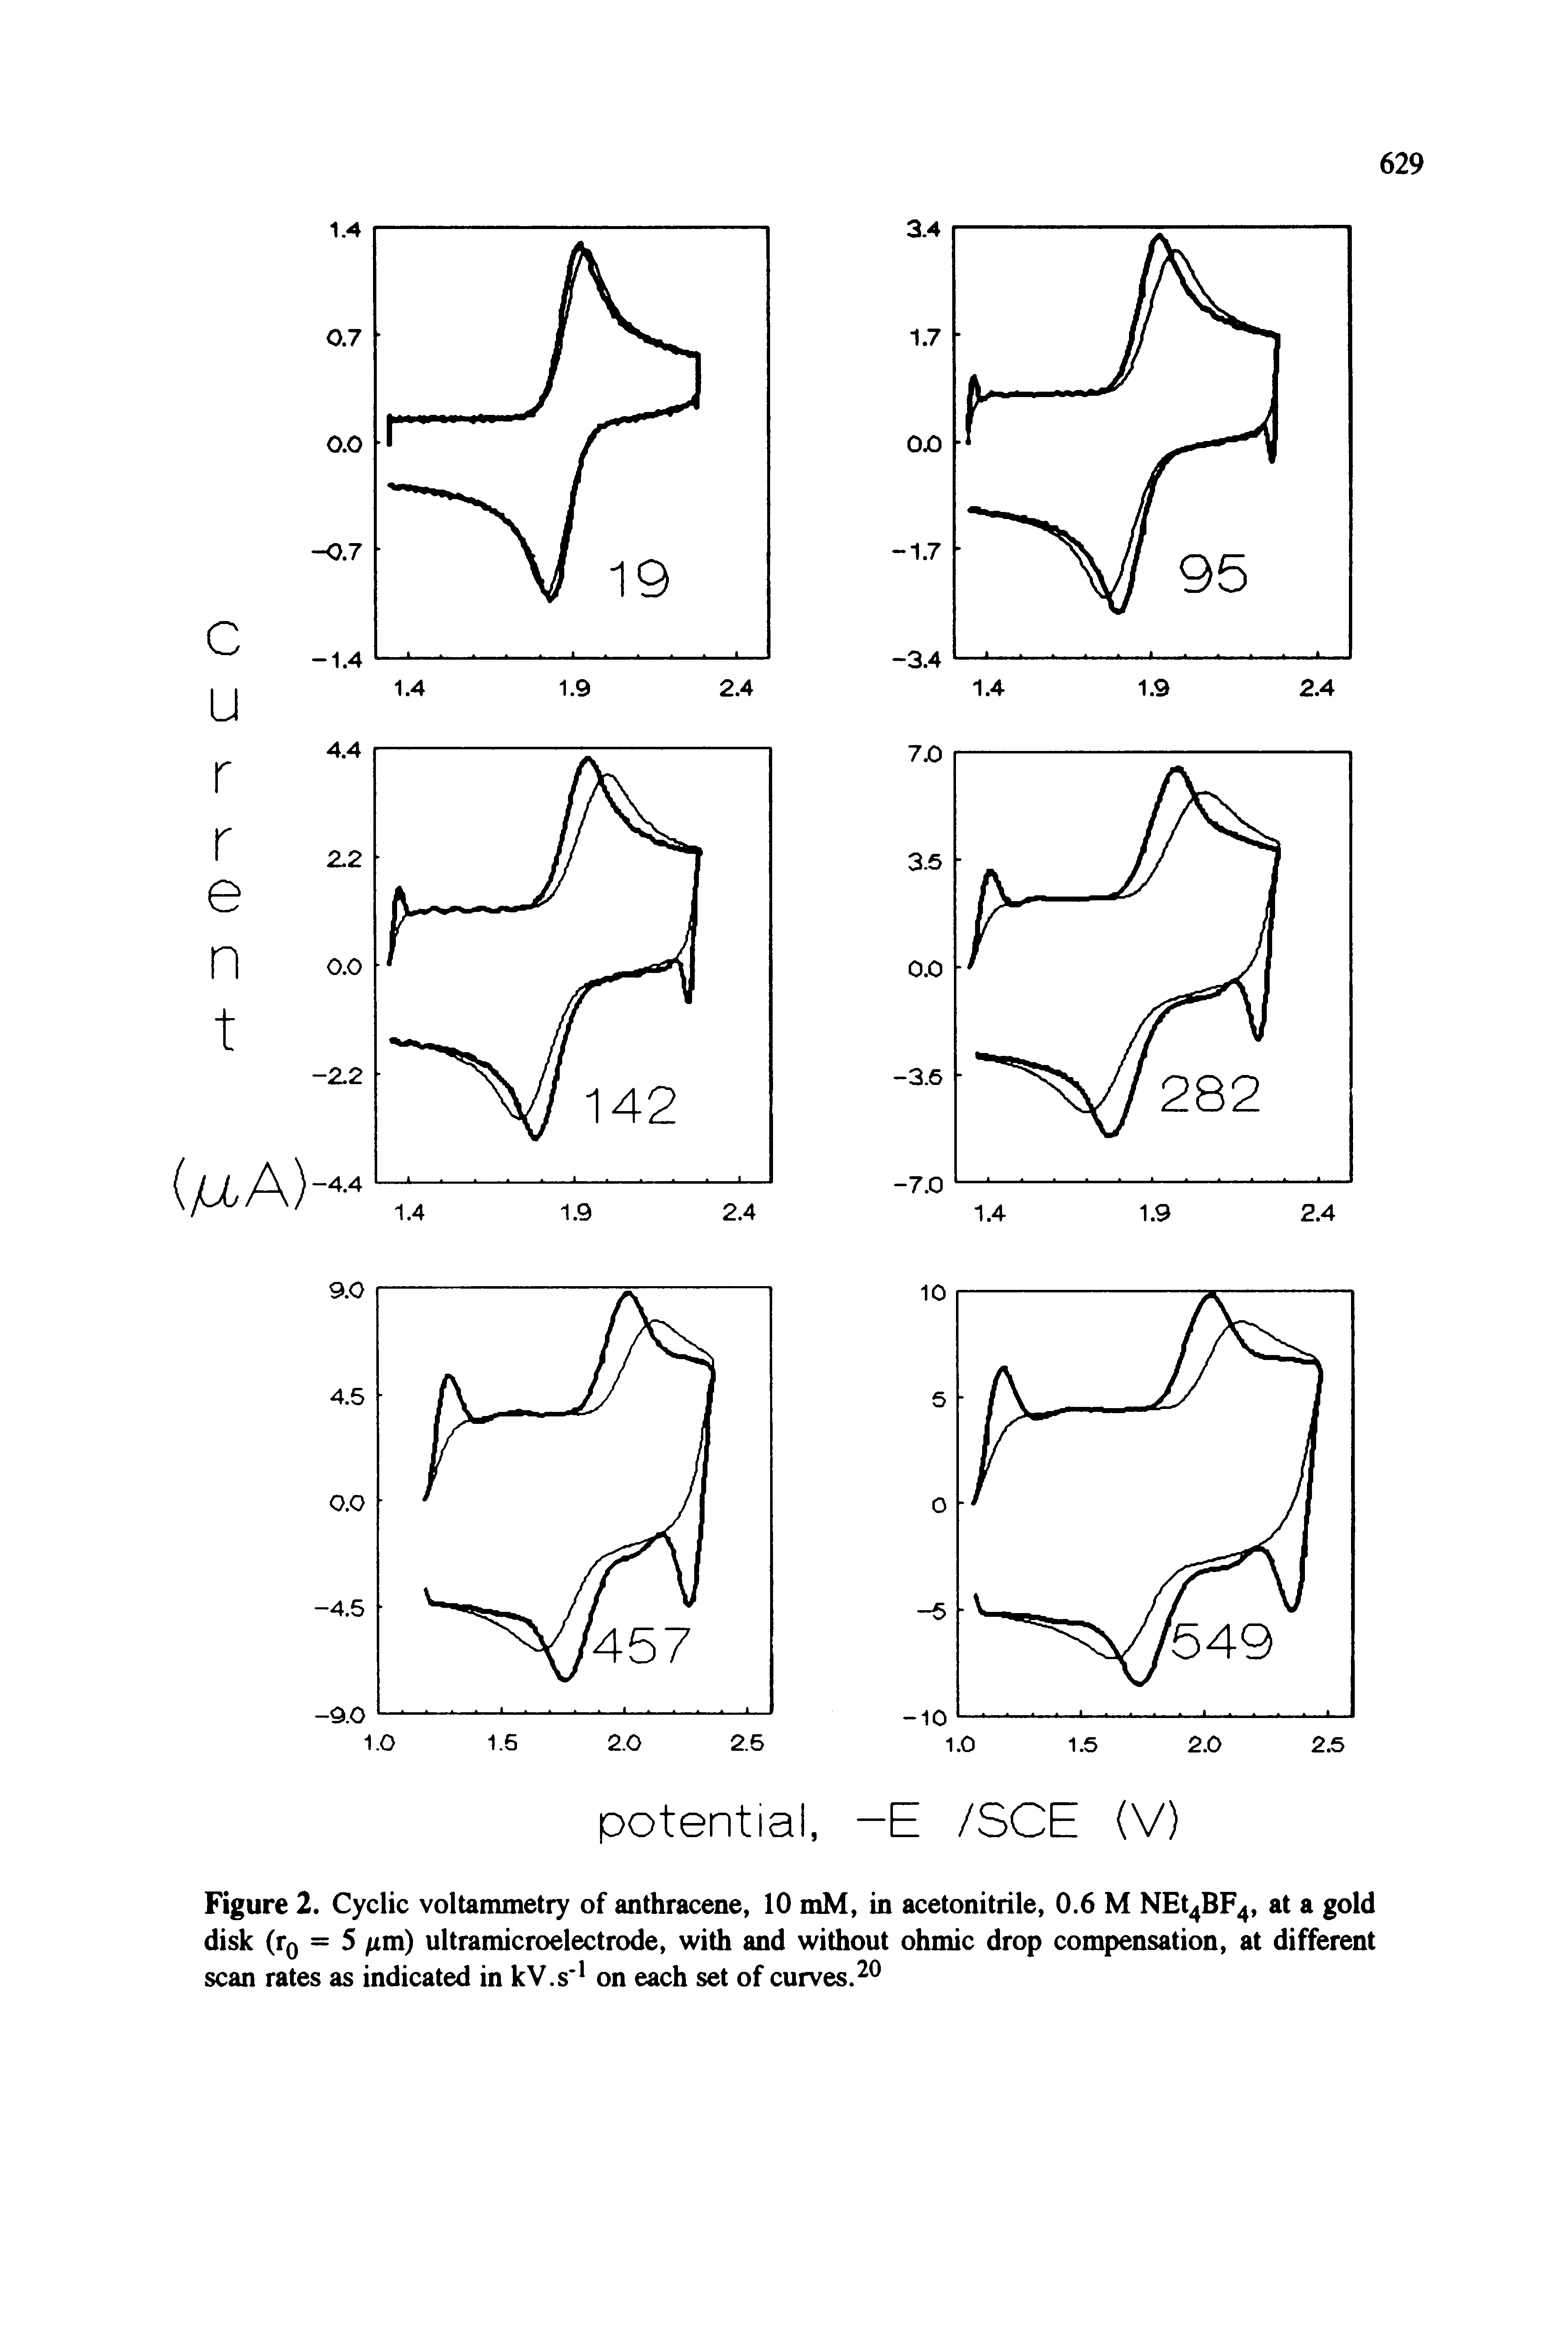 Figure 2. Cyclic voltammetry of anthracene, 10 mM, in acetonitrile, 0.6 M NEt4Bp4, at a gold disk (ro = 5 /im) ultramicroelectrode, with and without ohmic drop compensation, at different scan rates as indicated in kV.s on each set of curves. ...